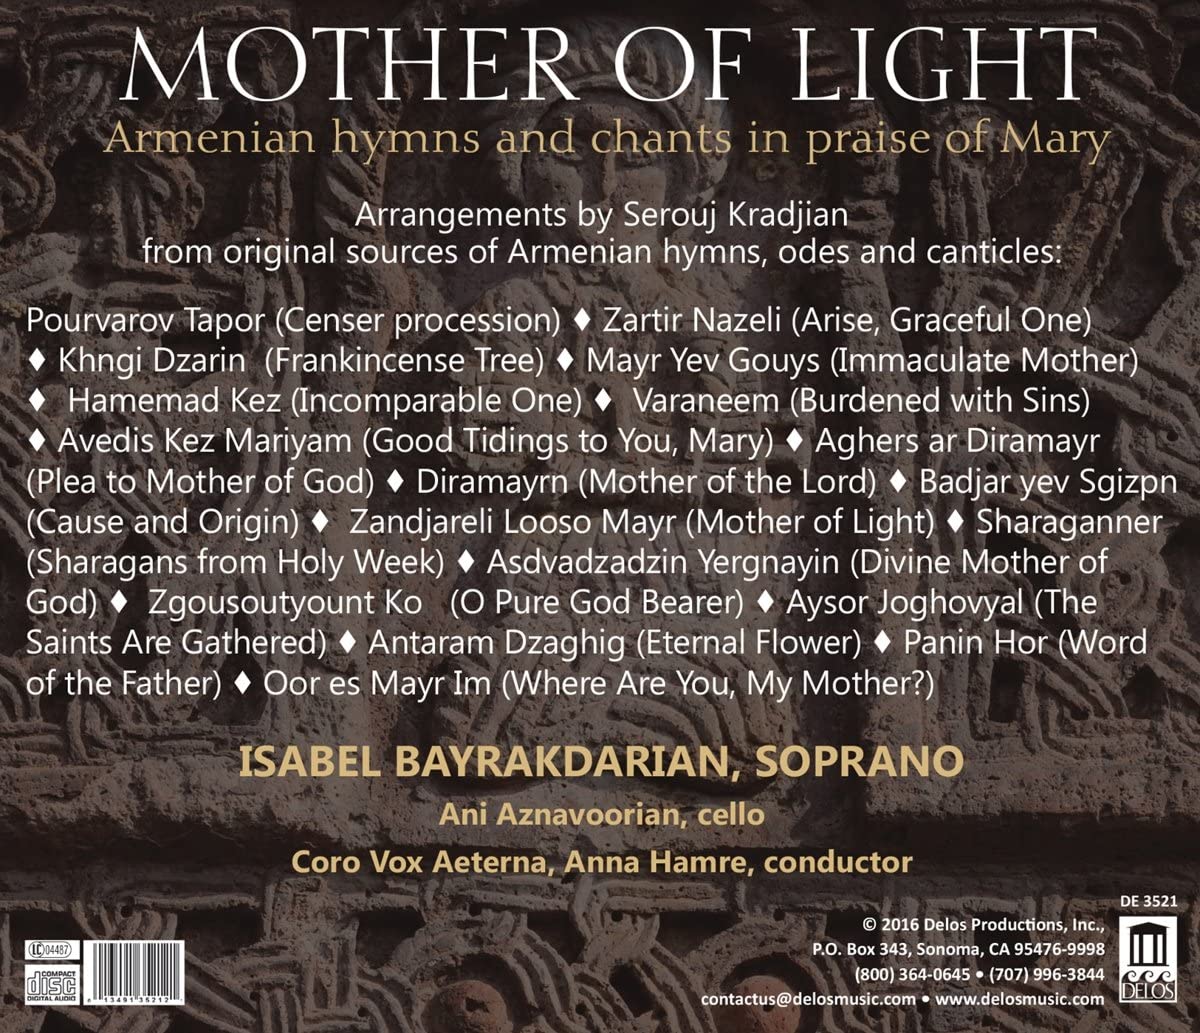 Mother of Light - Armenian hymns and chants in praise of Mary - slide-1